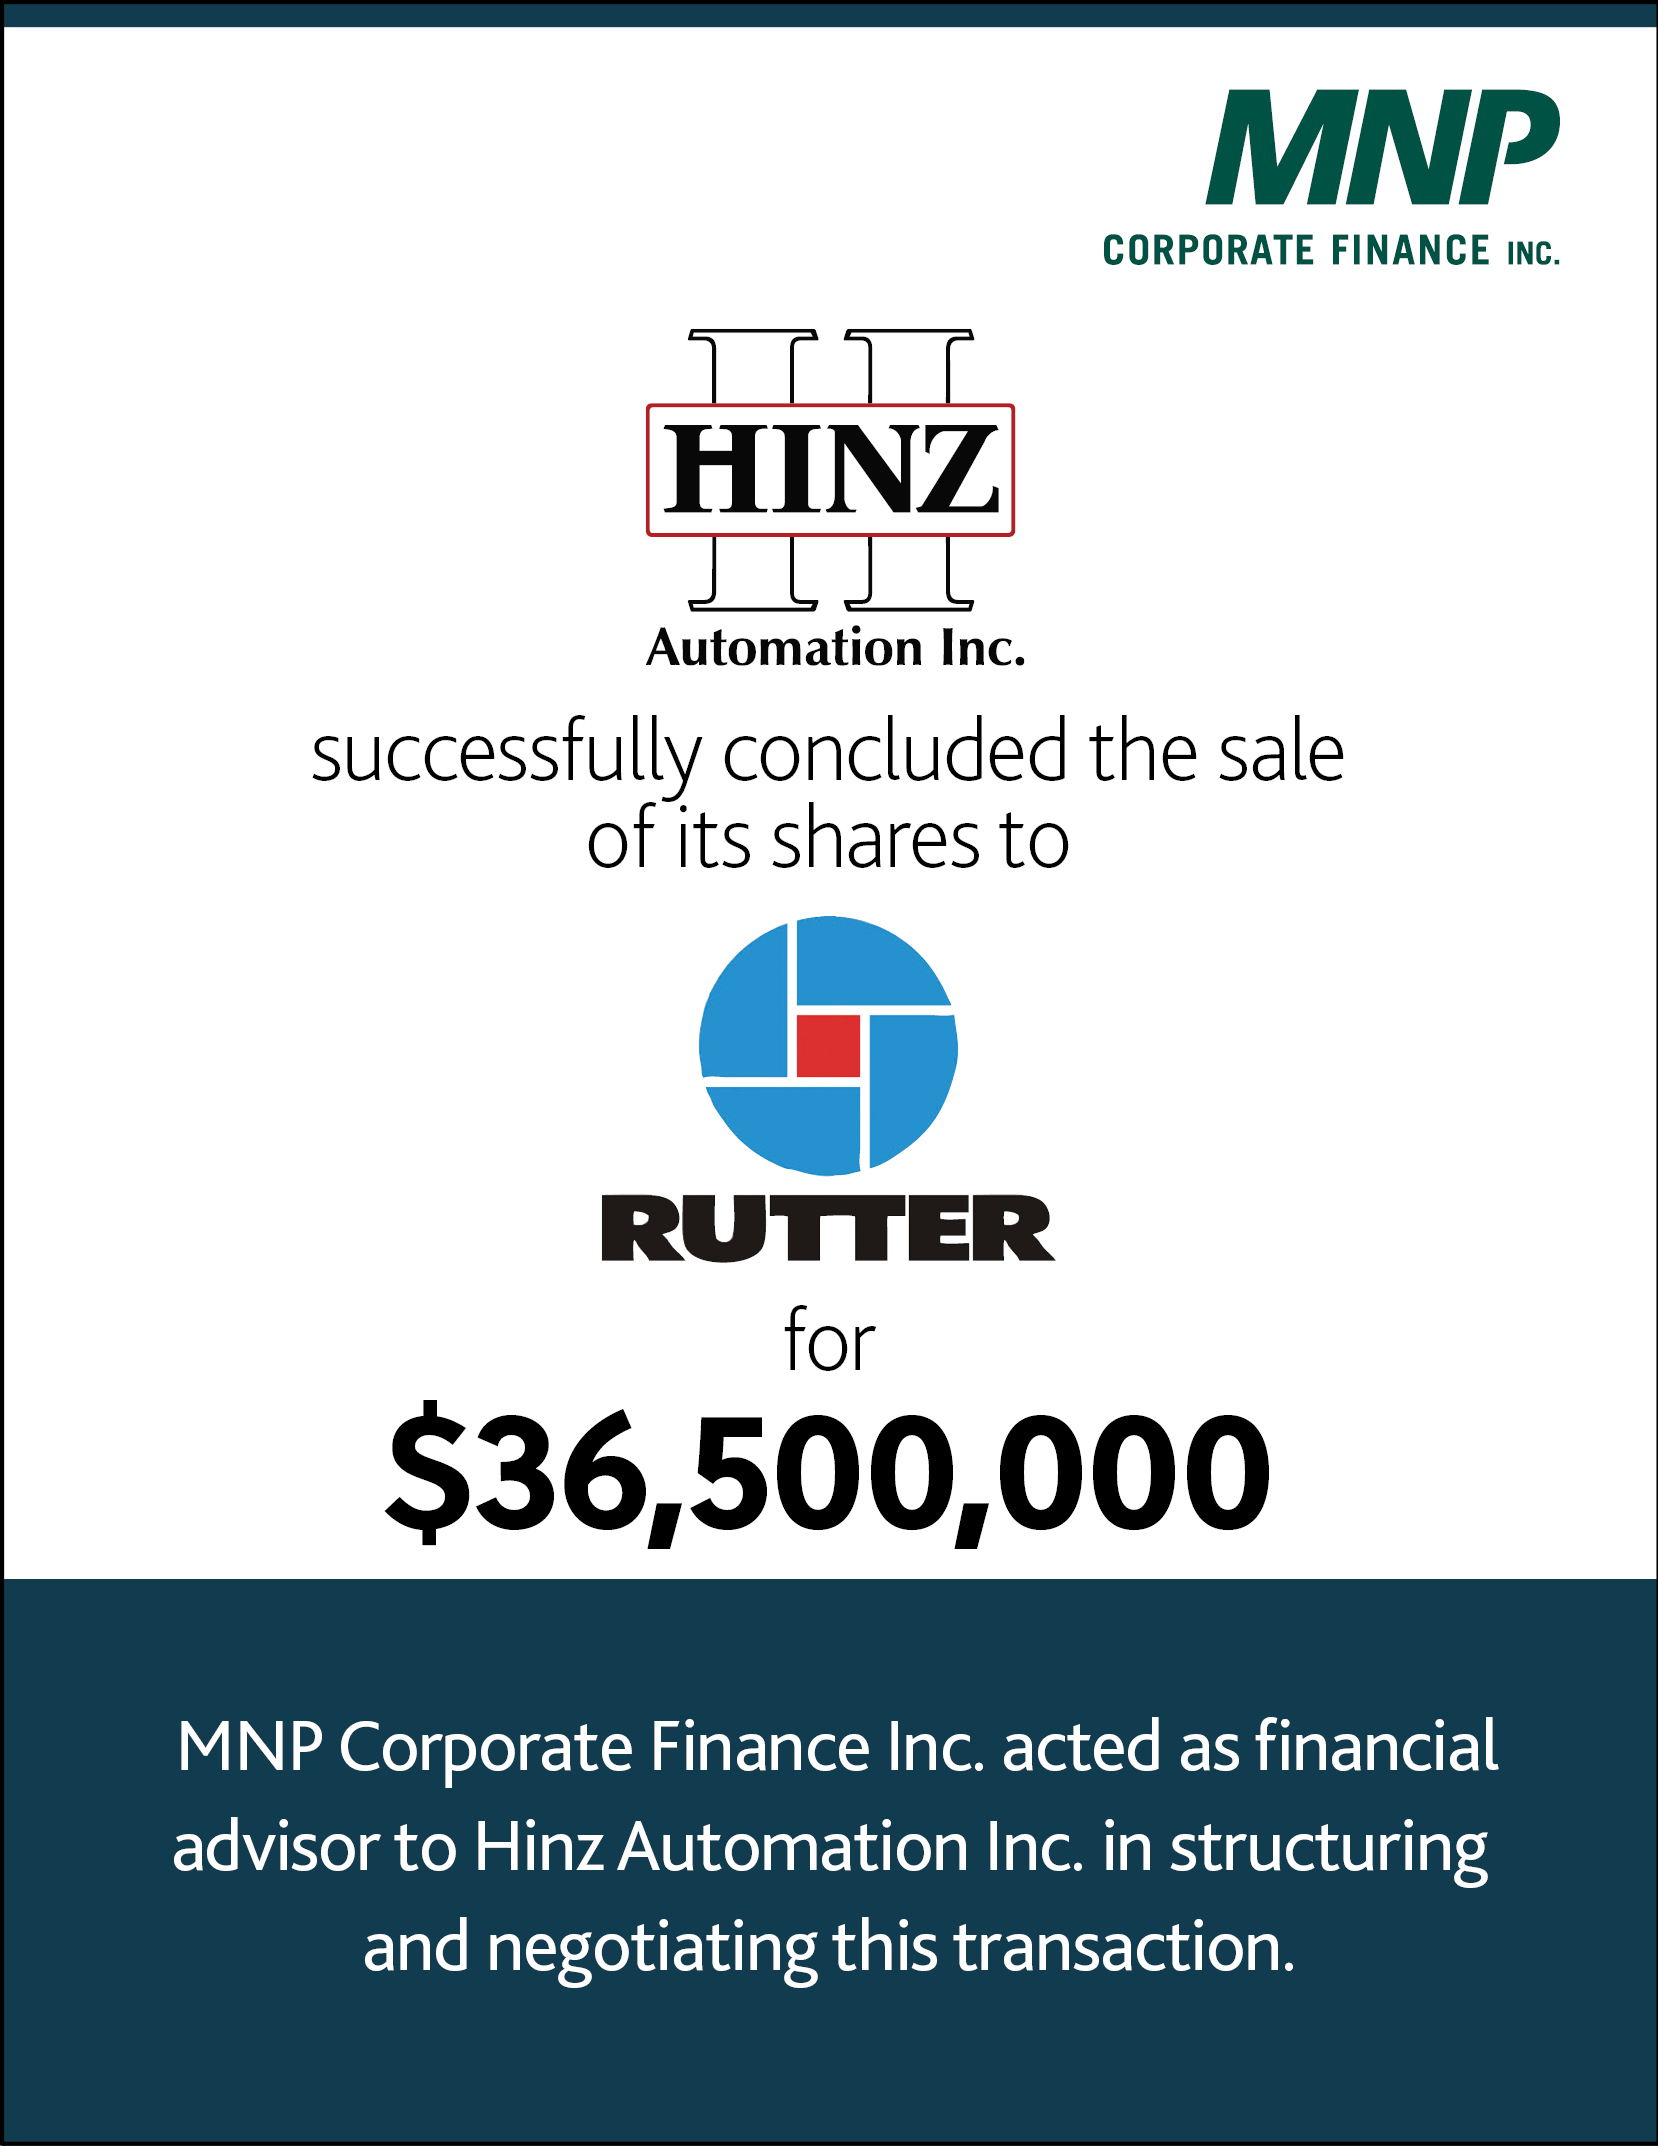 Hinz Automation Inc. successfully concluded the sale of its shares to Rutter for $36,500,000